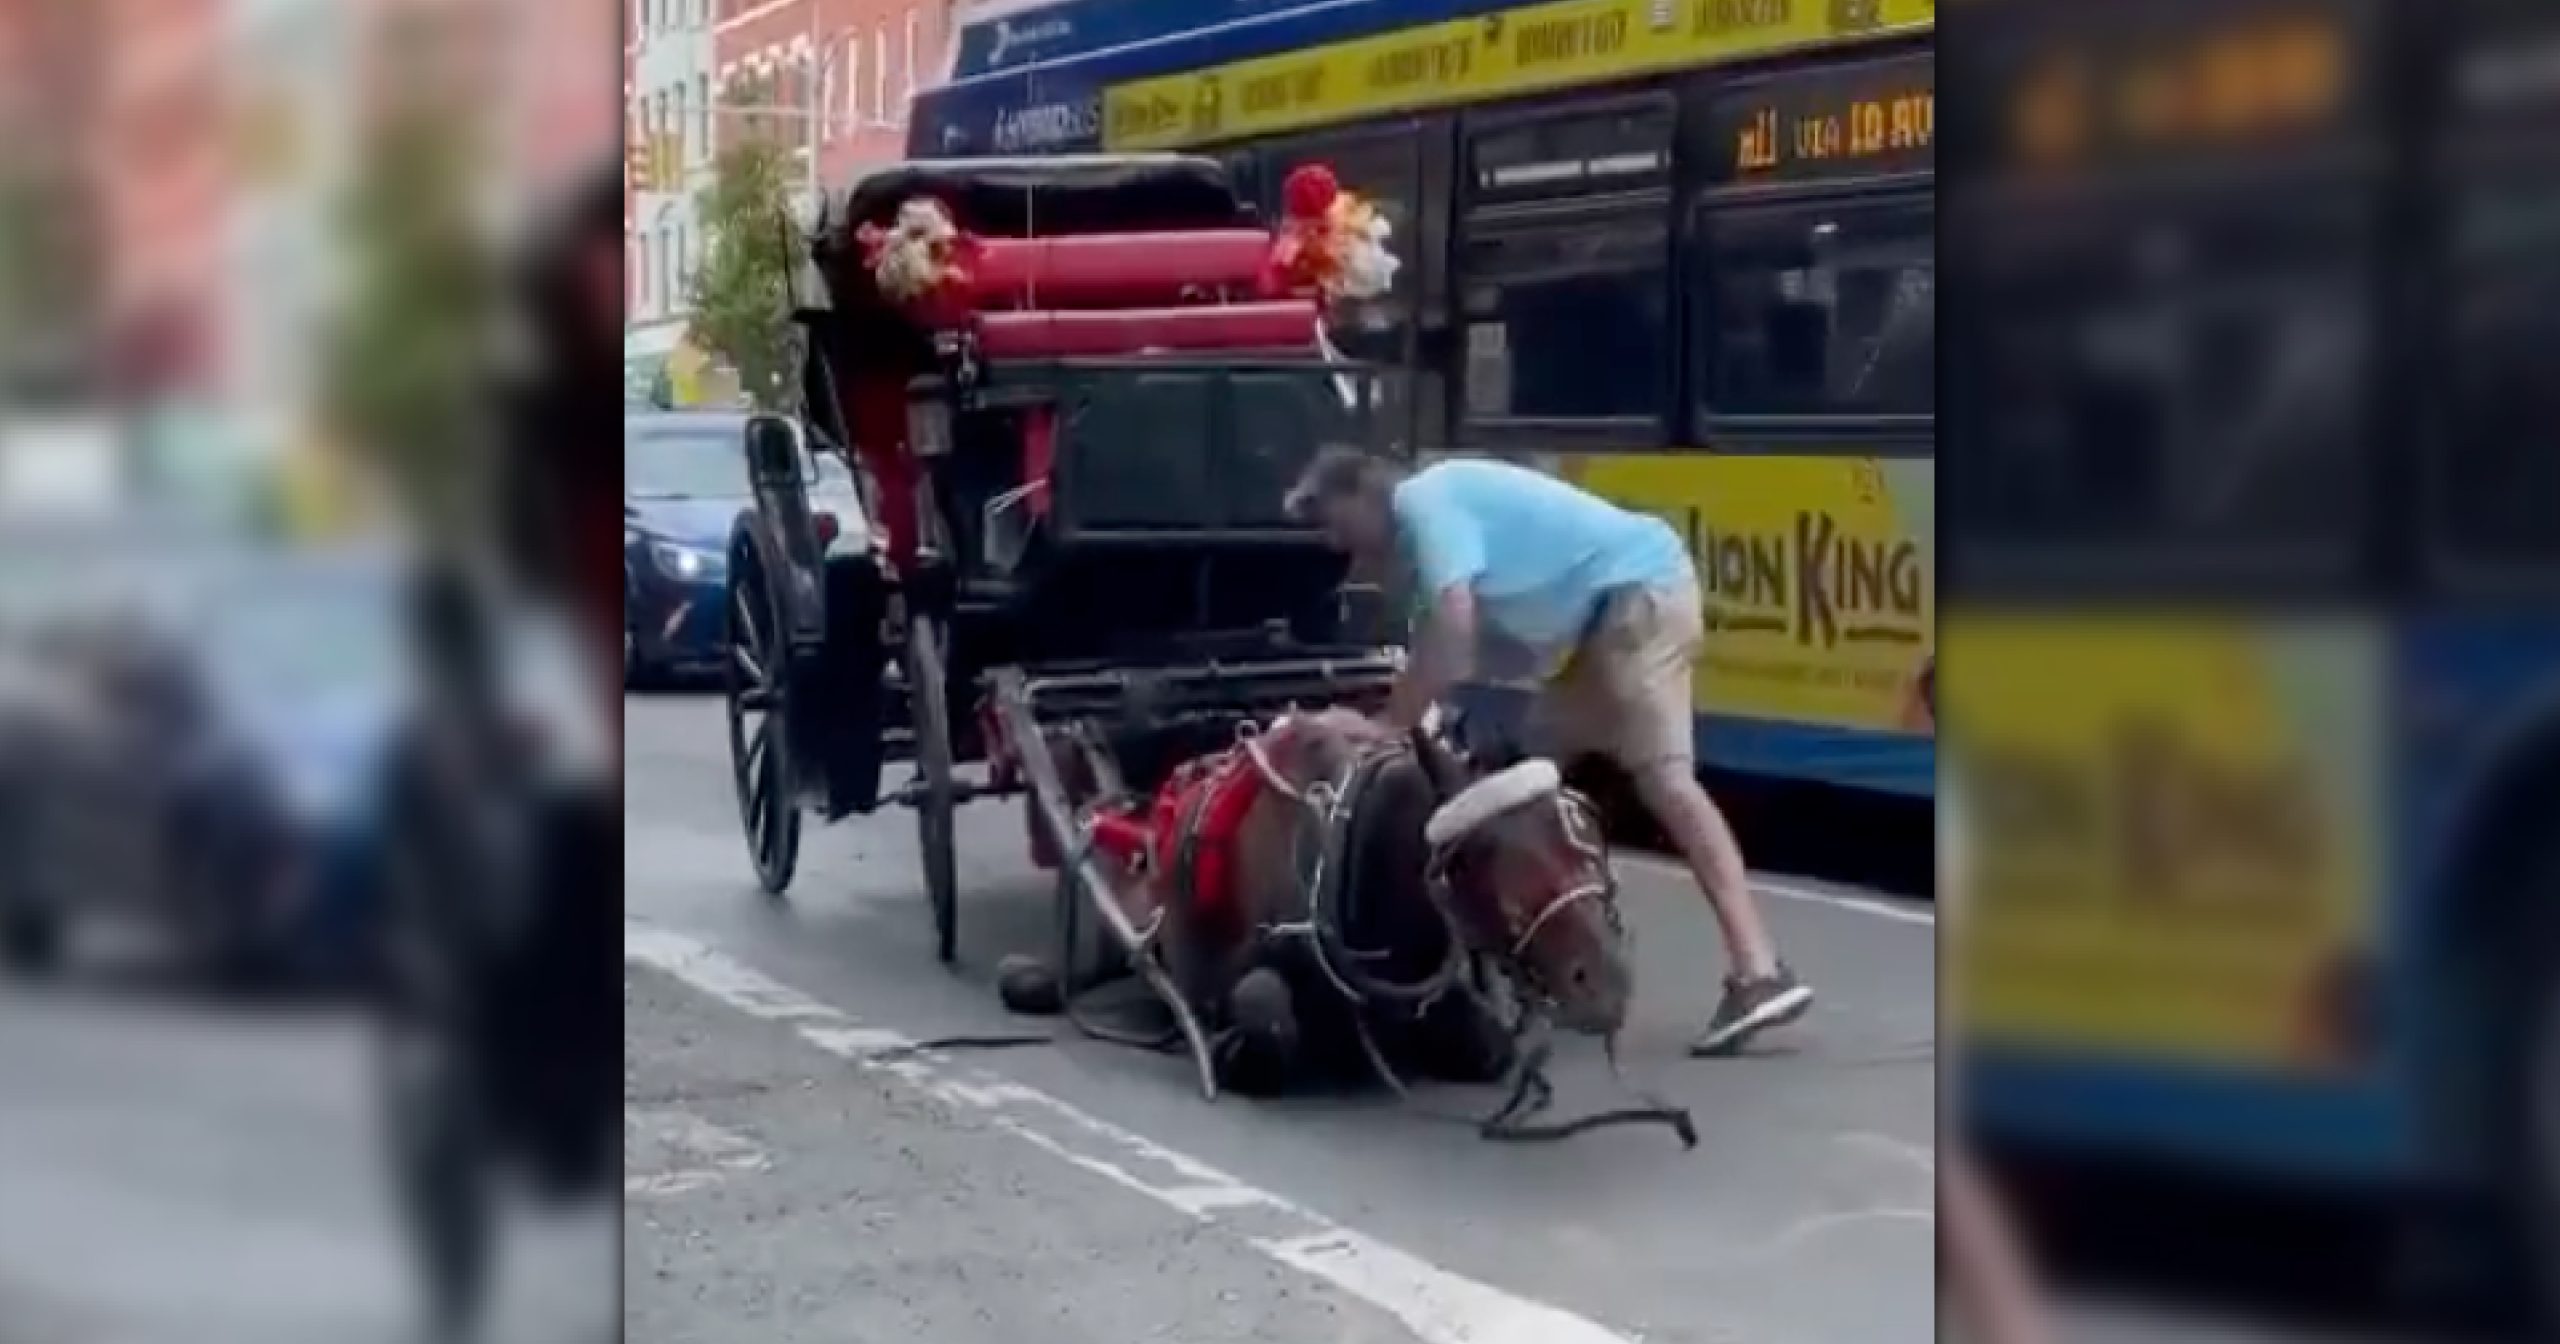 Image shows carriage horse collapsed in New York City